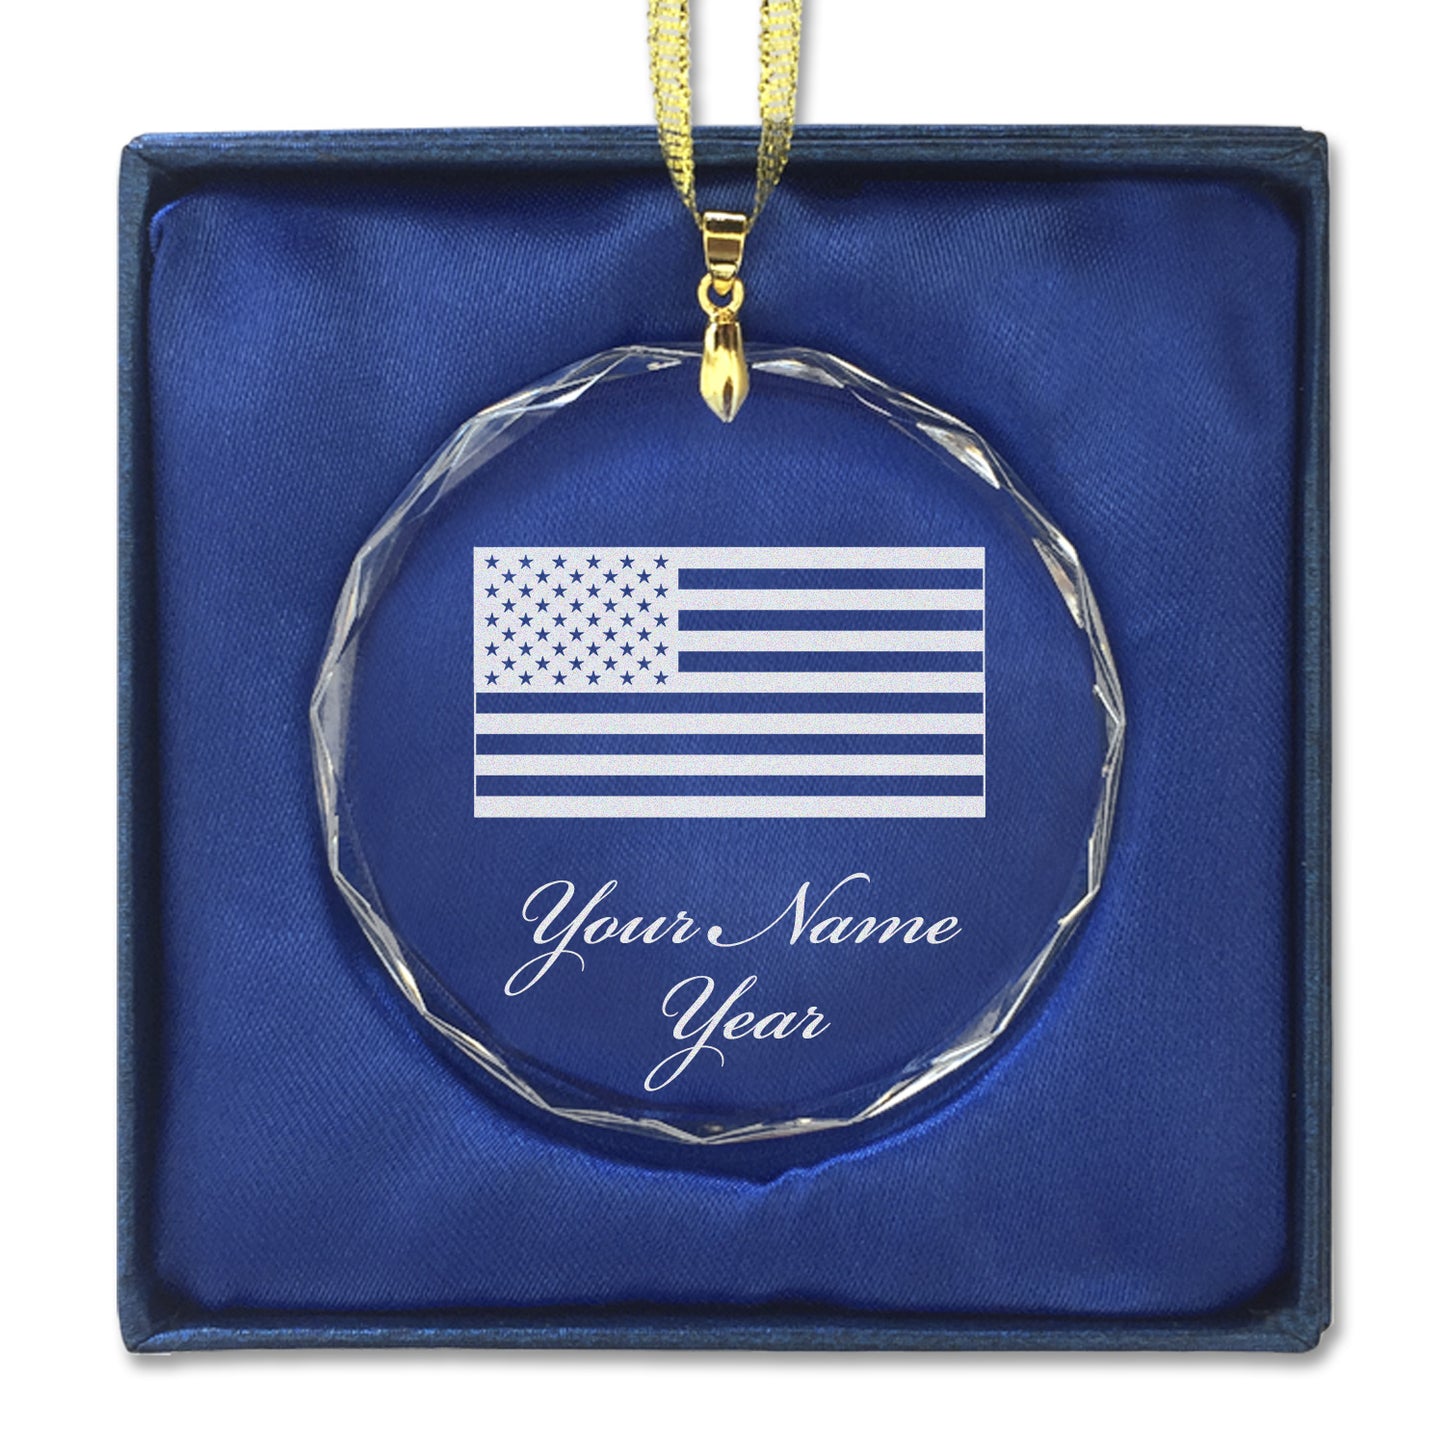 LaserGram Christmas Ornament, Flag of the United States, Personalized Engraving Included (Round Shape)